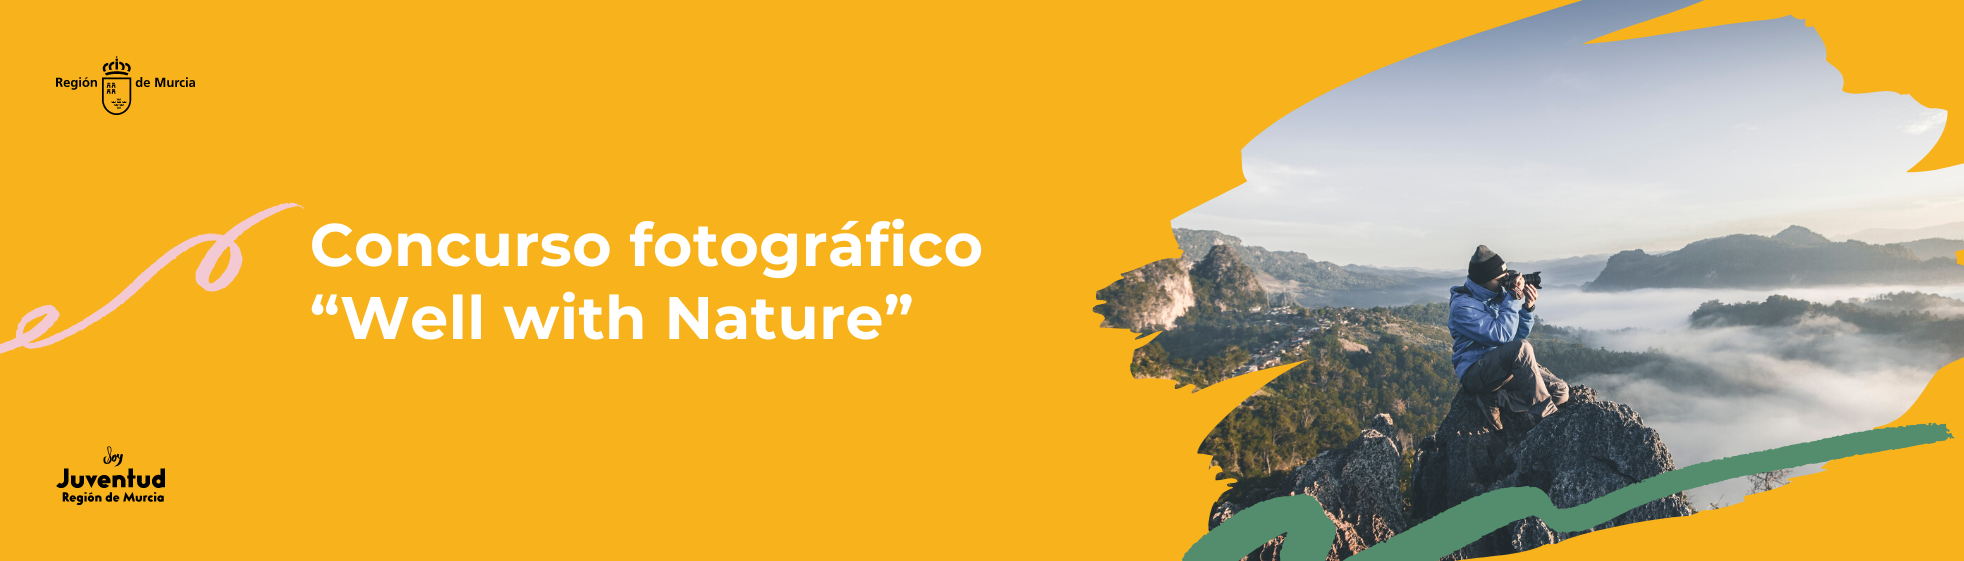 Concurso fotográfico “Well with Nature”